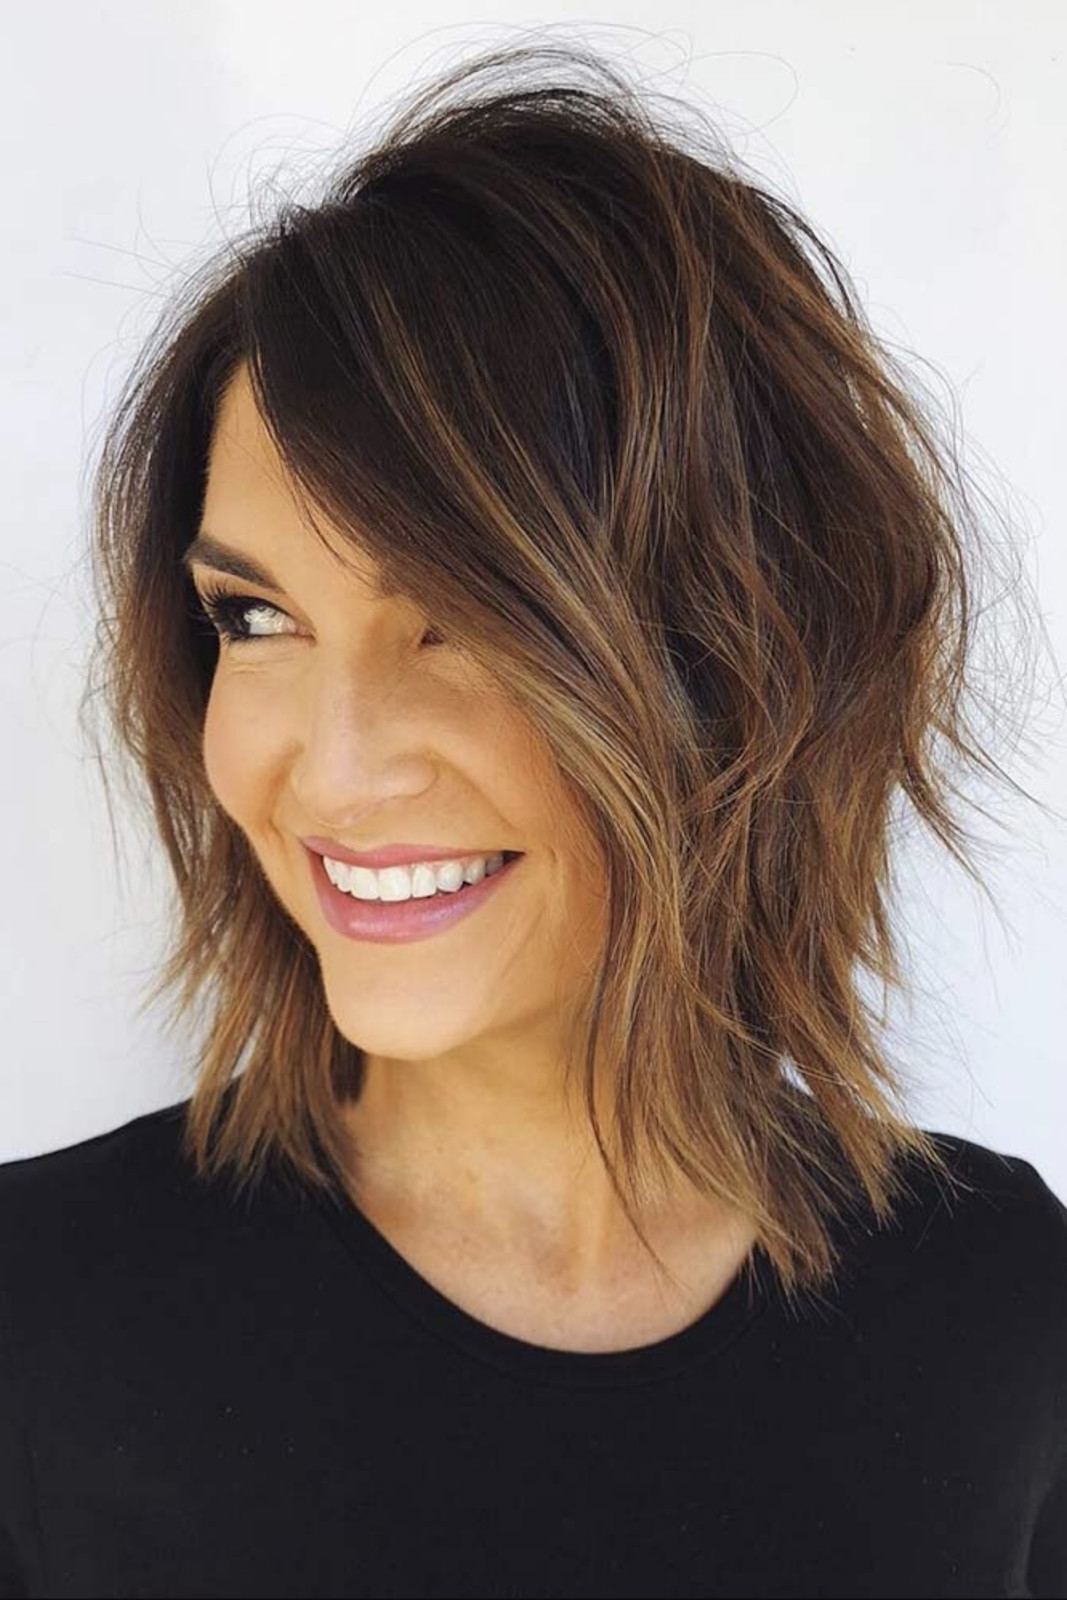 Hairstyle For 2020 Female
 2019 2020 Short Hairstyles for Women Over 50 That Are